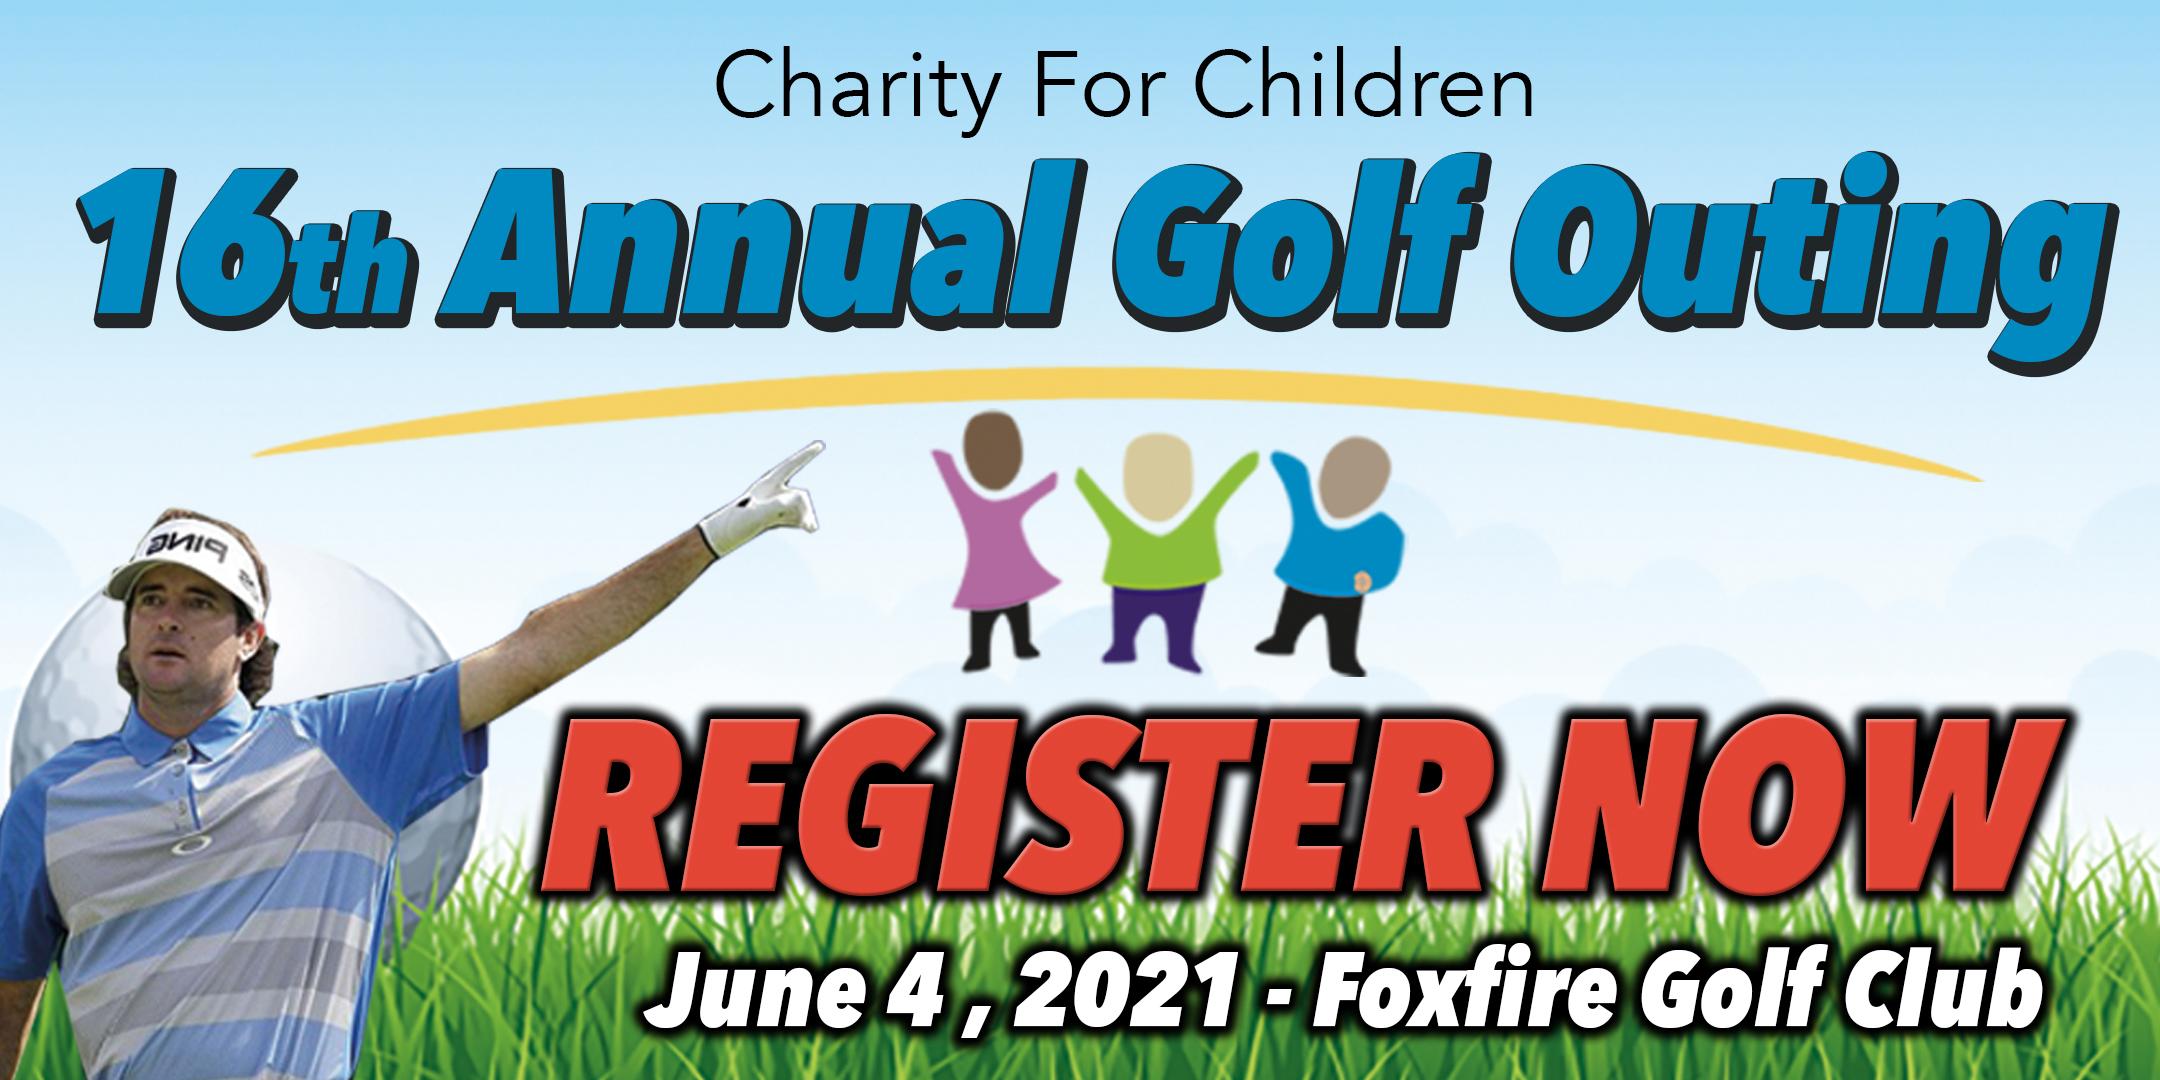 Copy of Charity For Children 16th Annual Golf Outing